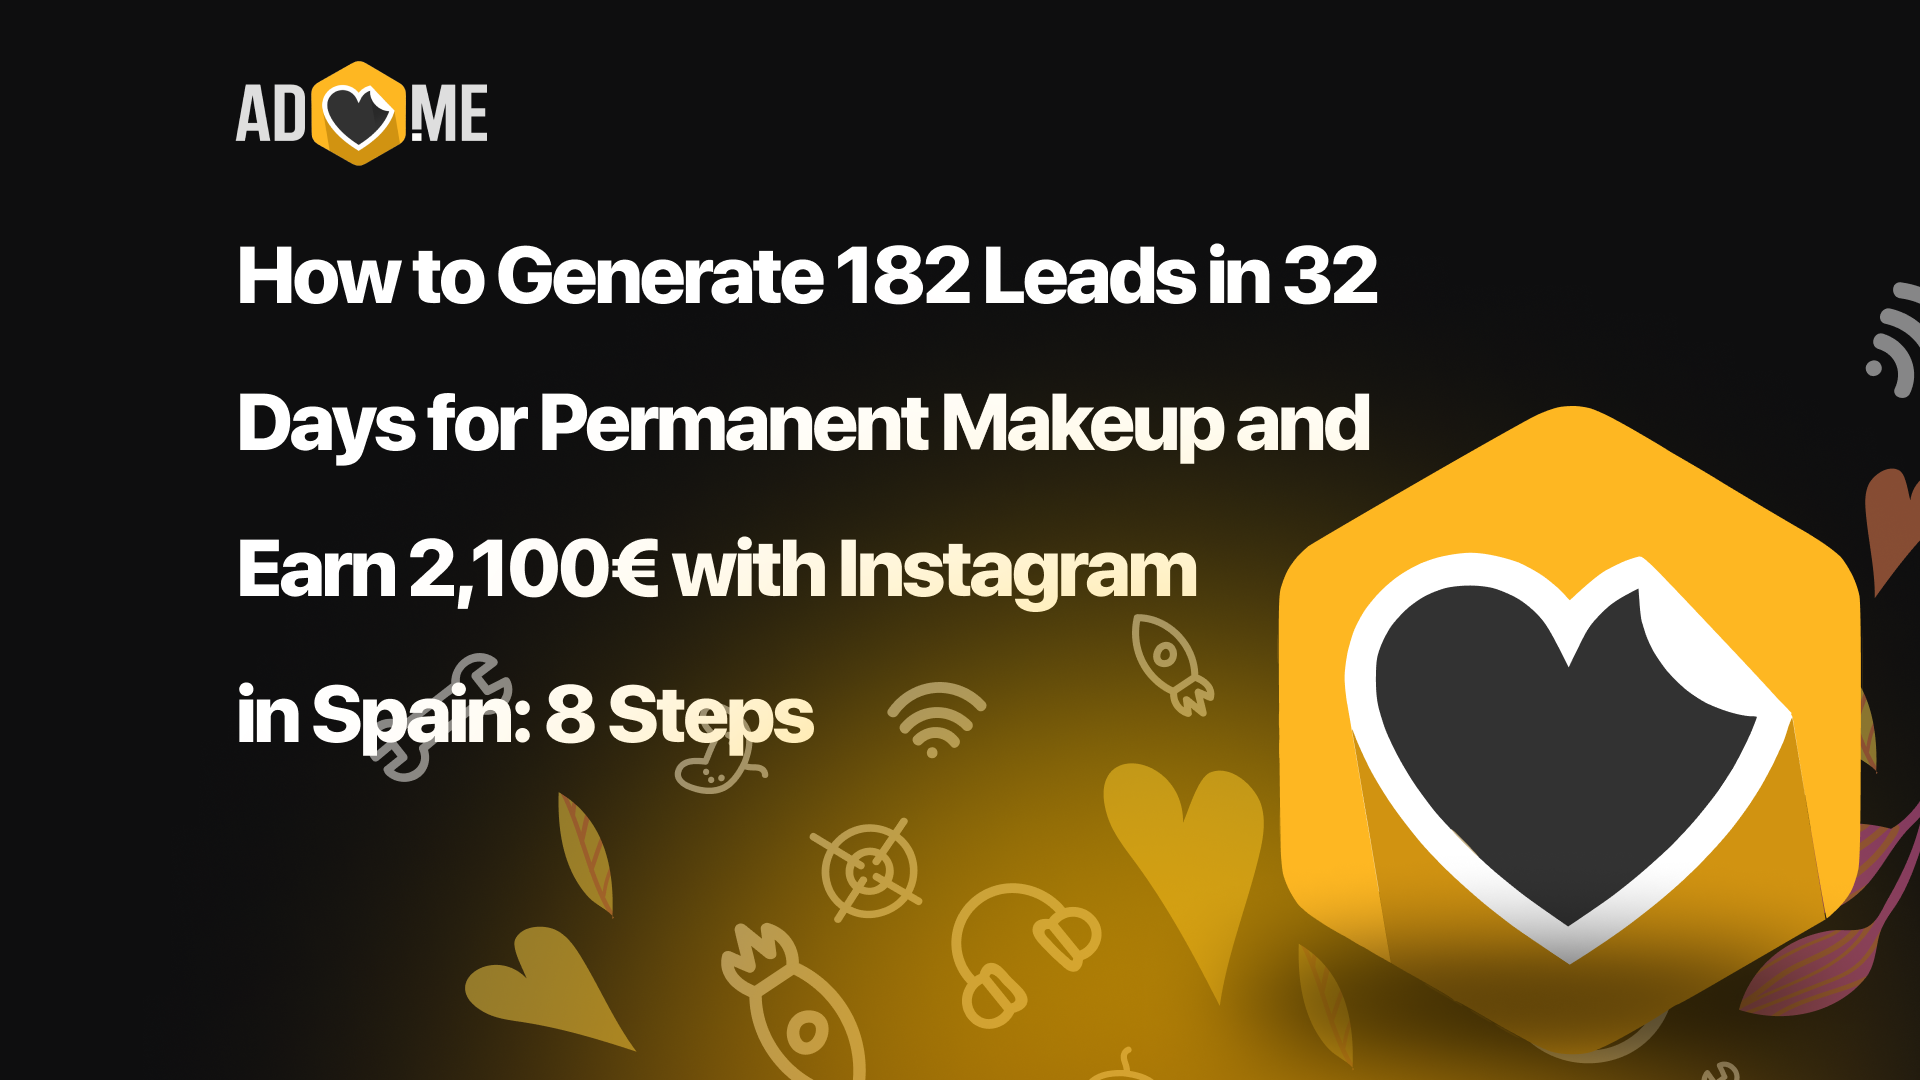 How to Generate 182 Leads in 32 Days for Permanent Makeup and Earn 2,100€ with Instagram in Spain: 8 Steps